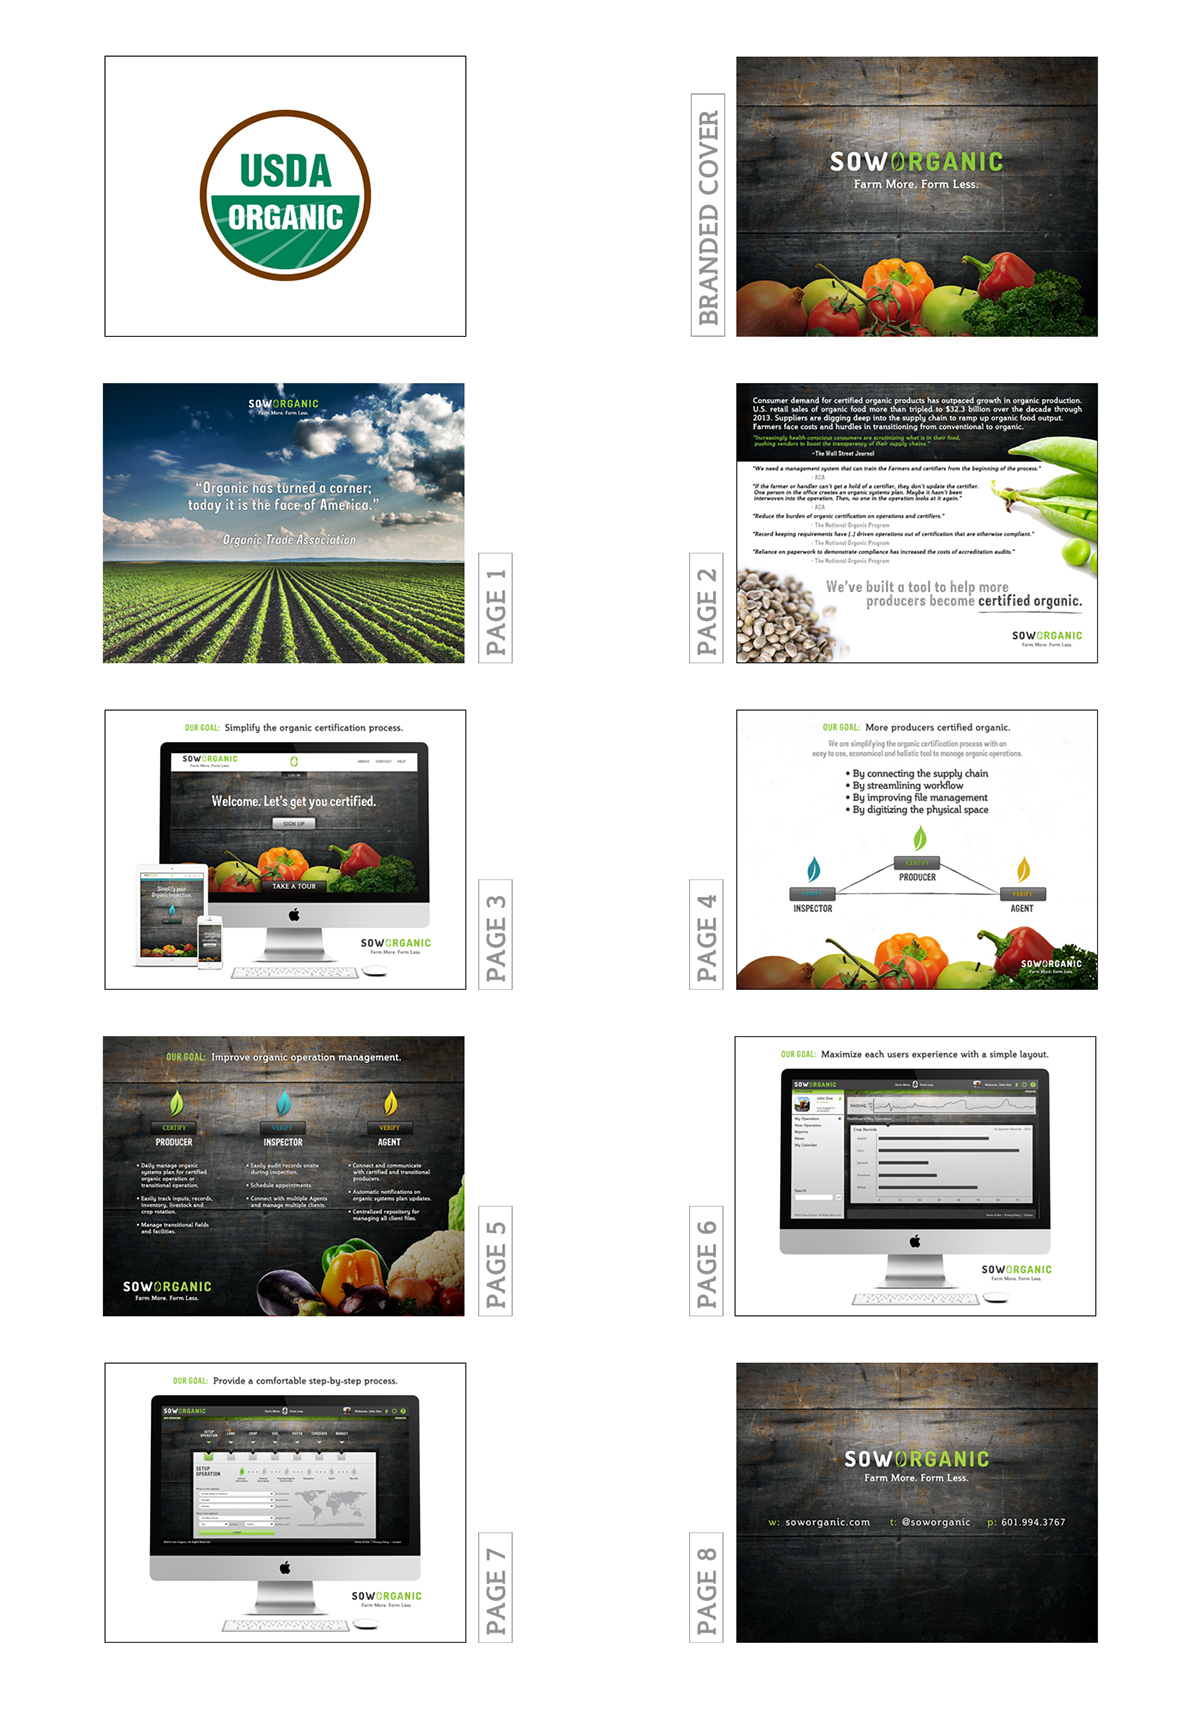 organic farming agriculture software animals produce Food  mobile International green